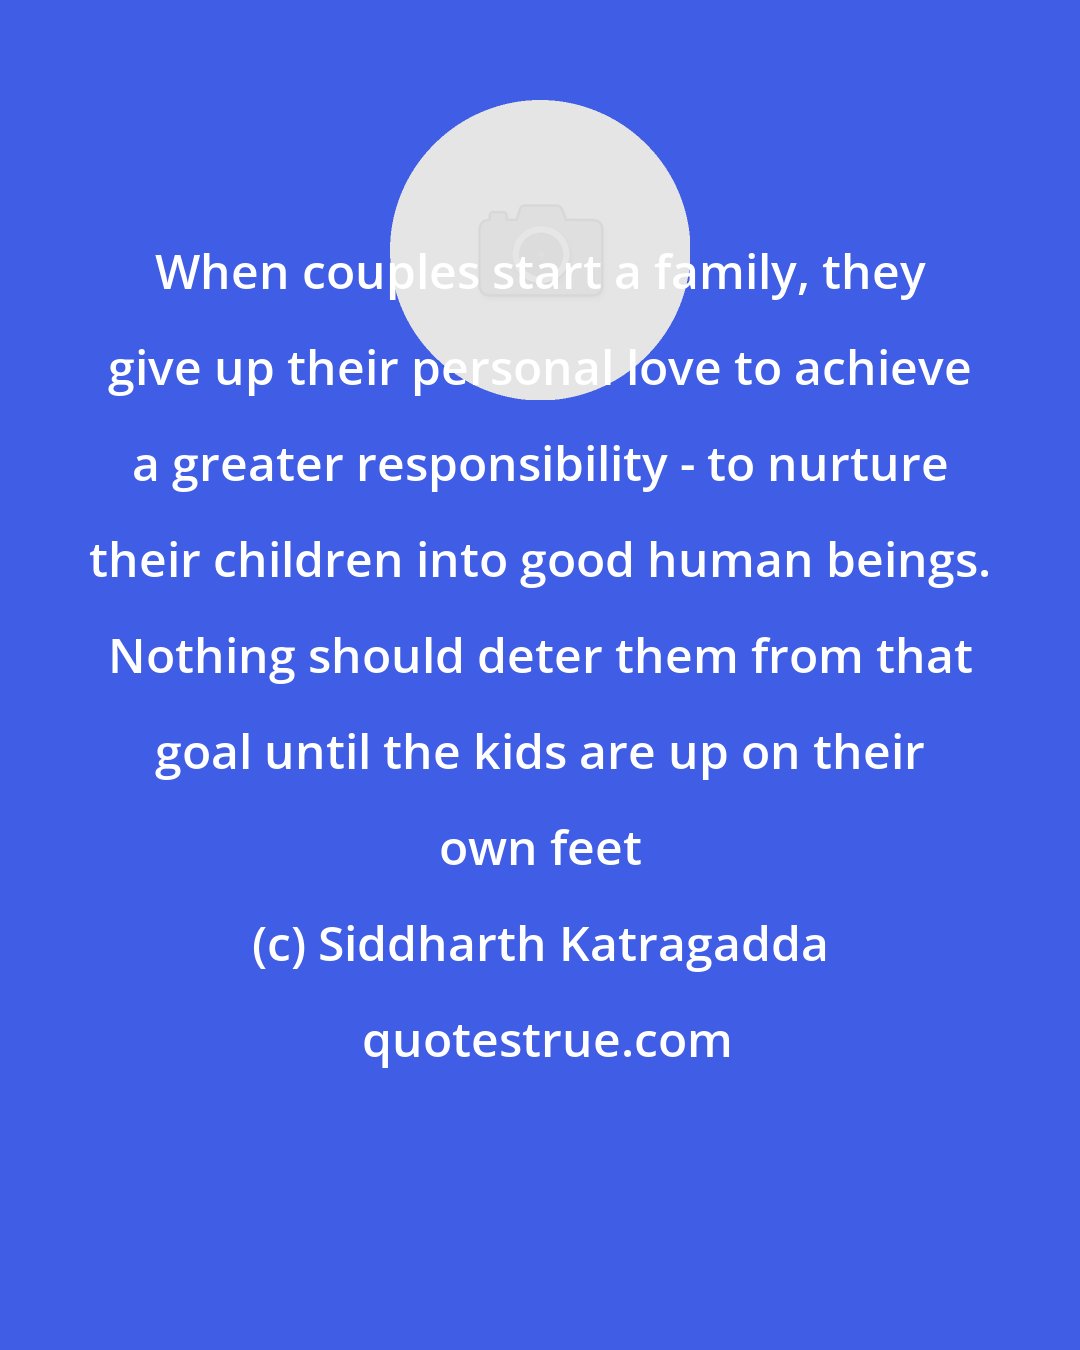 Siddharth Katragadda: When couples start a family, they give up their personal love to achieve a greater responsibility - to nurture their children into good human beings. Nothing should deter them from that goal until the kids are up on their own feet